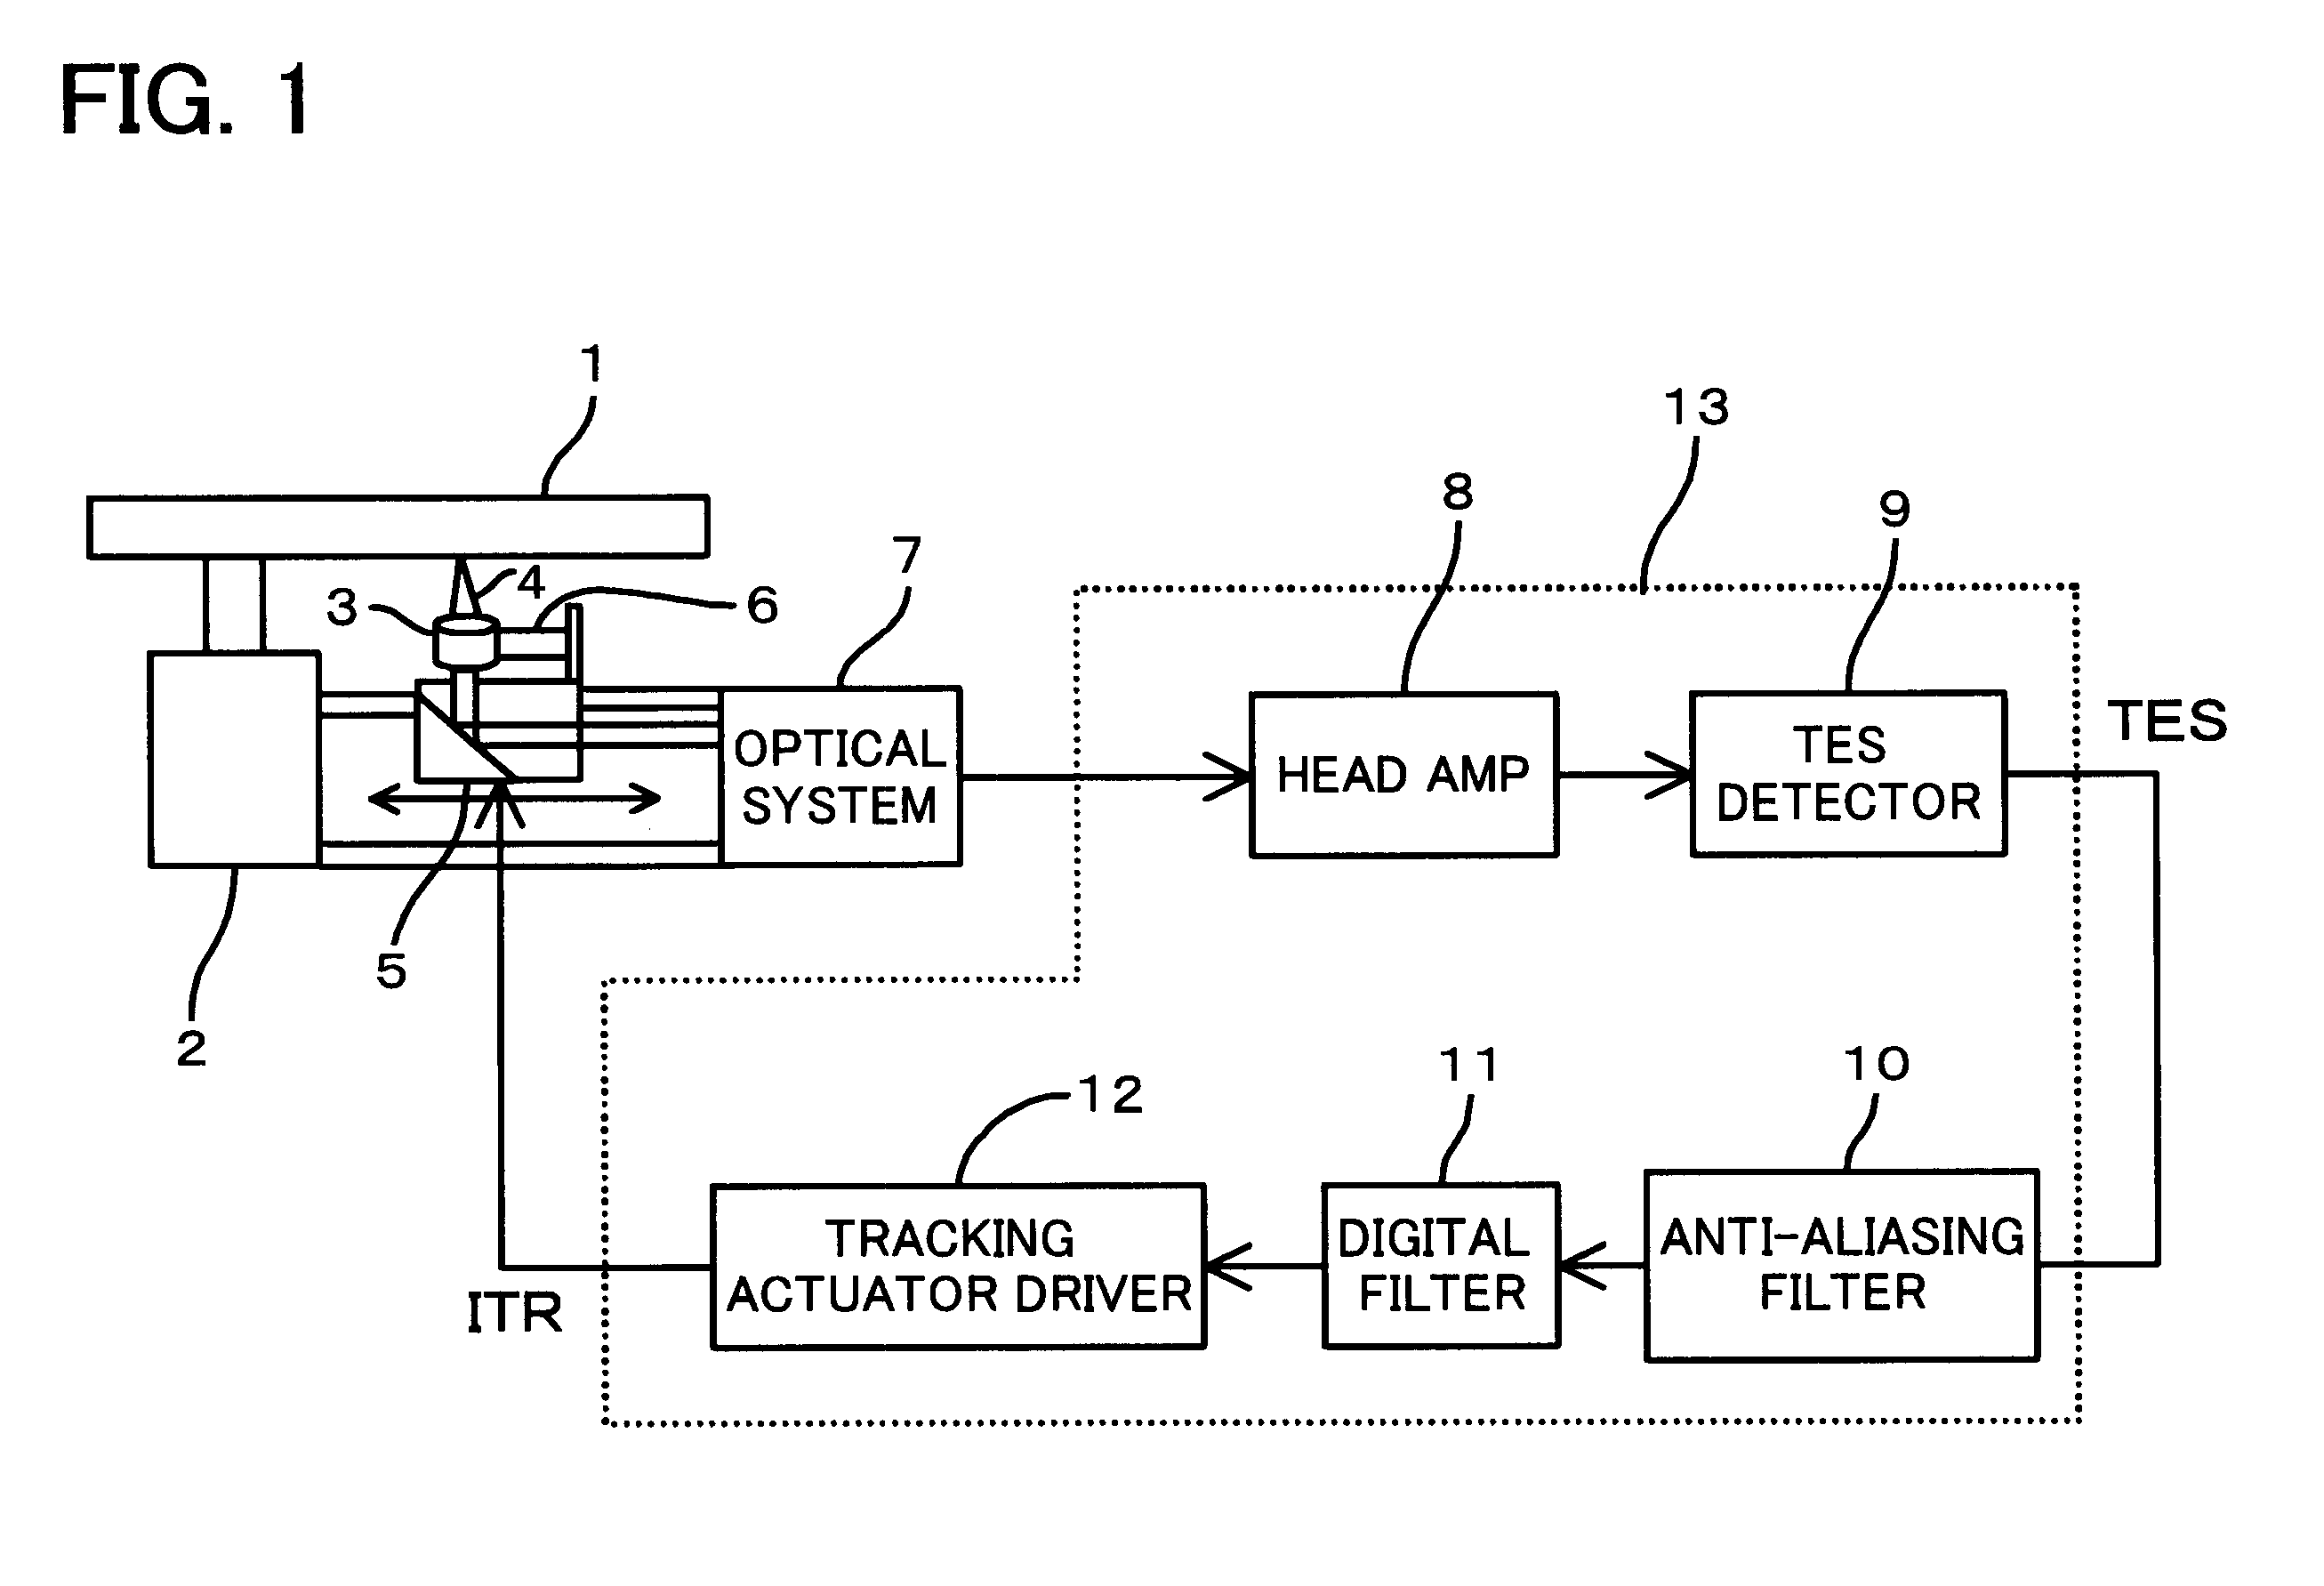 Servo with digital filter to control gain in a frequency band where open loop characteristic is higher than the phase cross-over frequency and lower than resonance frequency